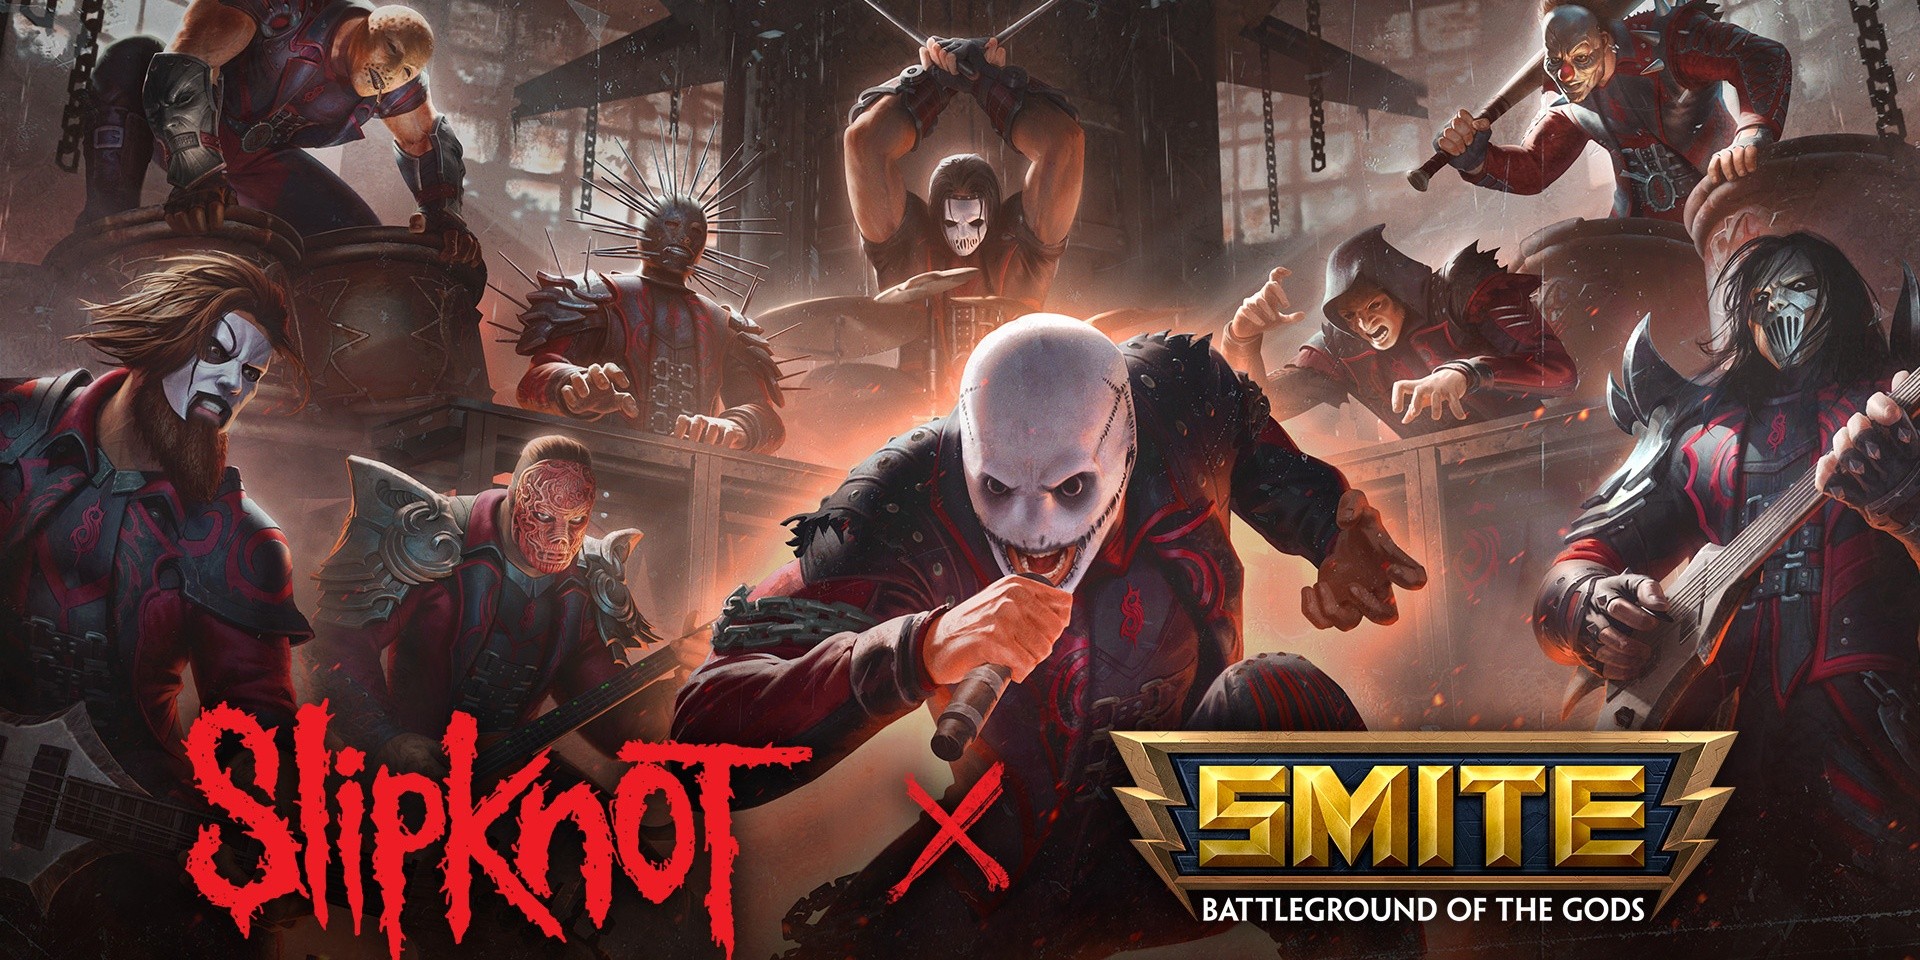 SMITE goes metal with Slipknot crossover event, skins, and more